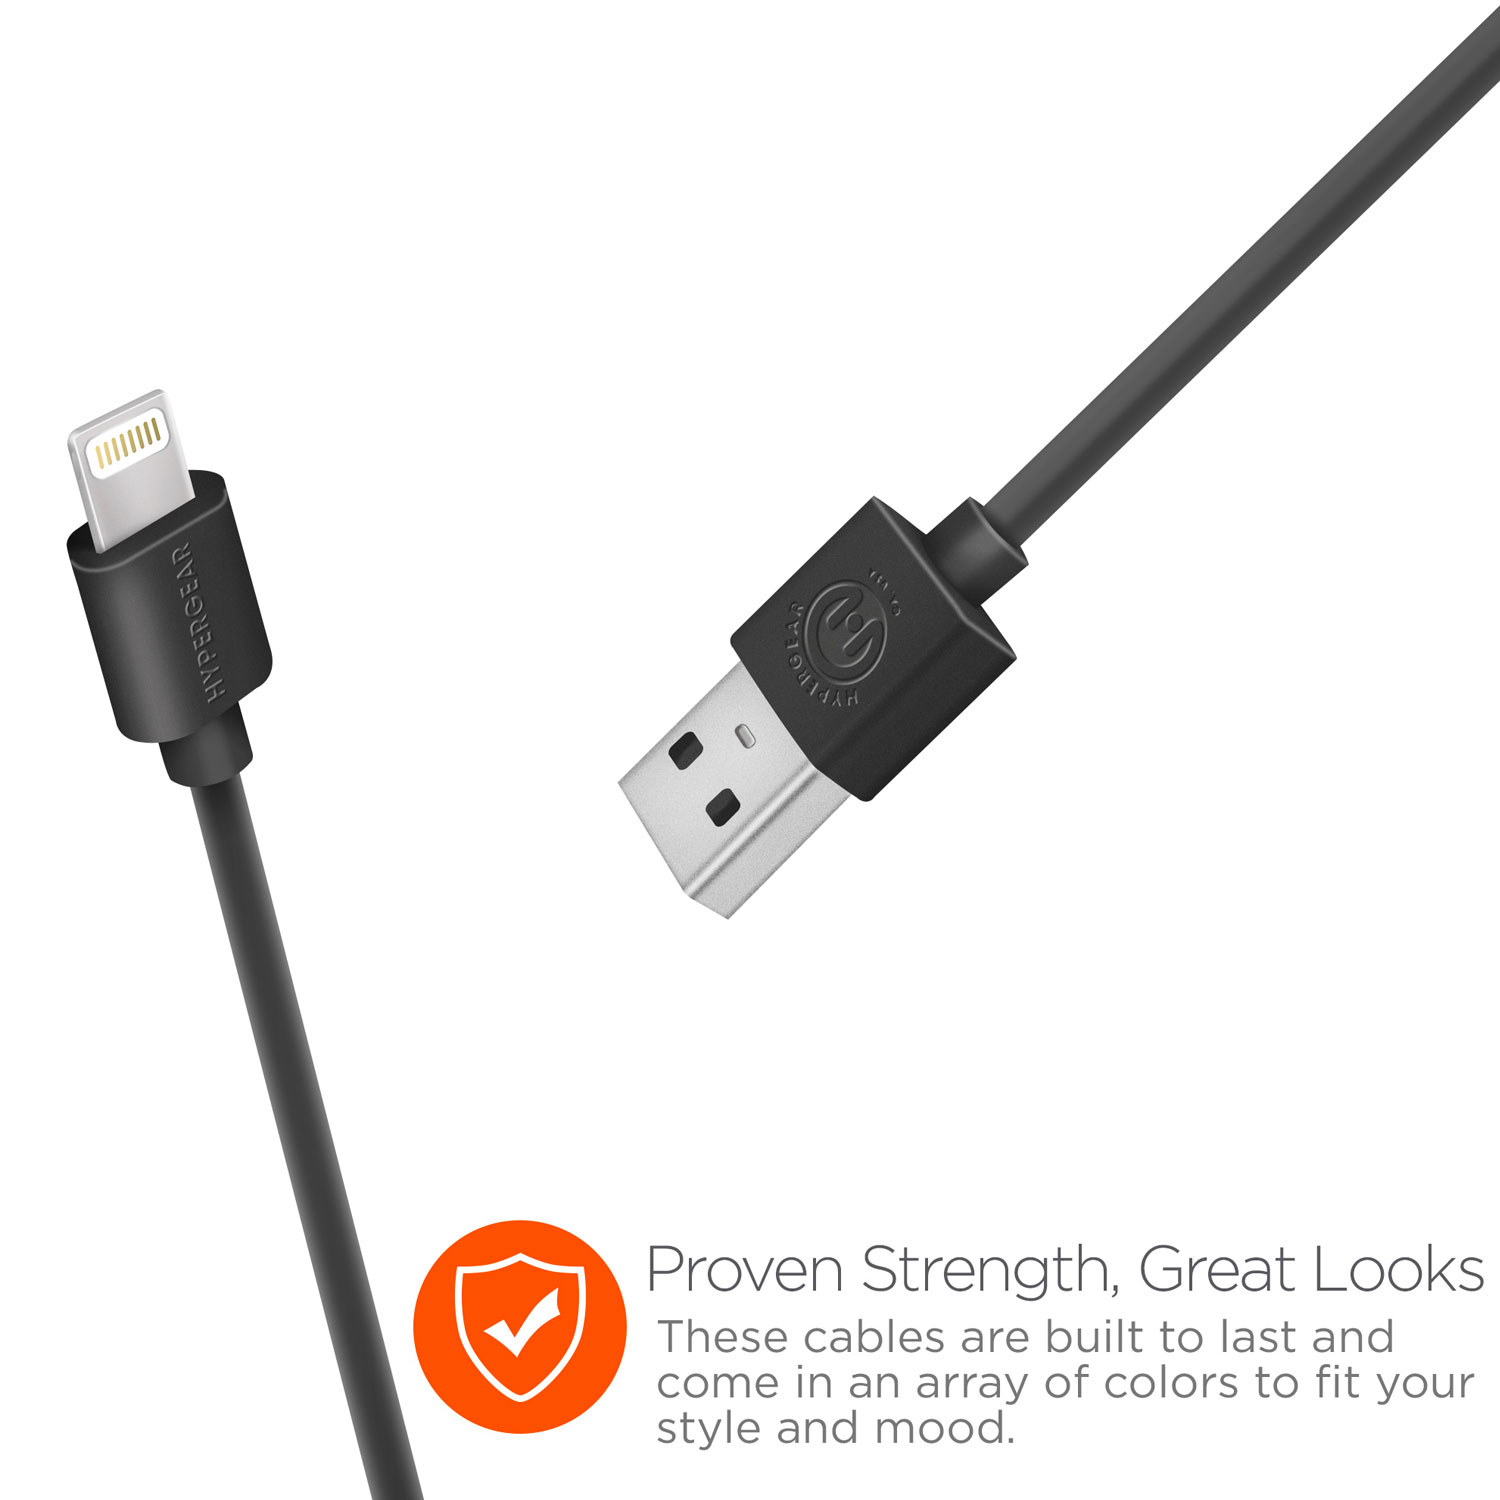 MFi Lightning 4ft. Charge & Sync Cable